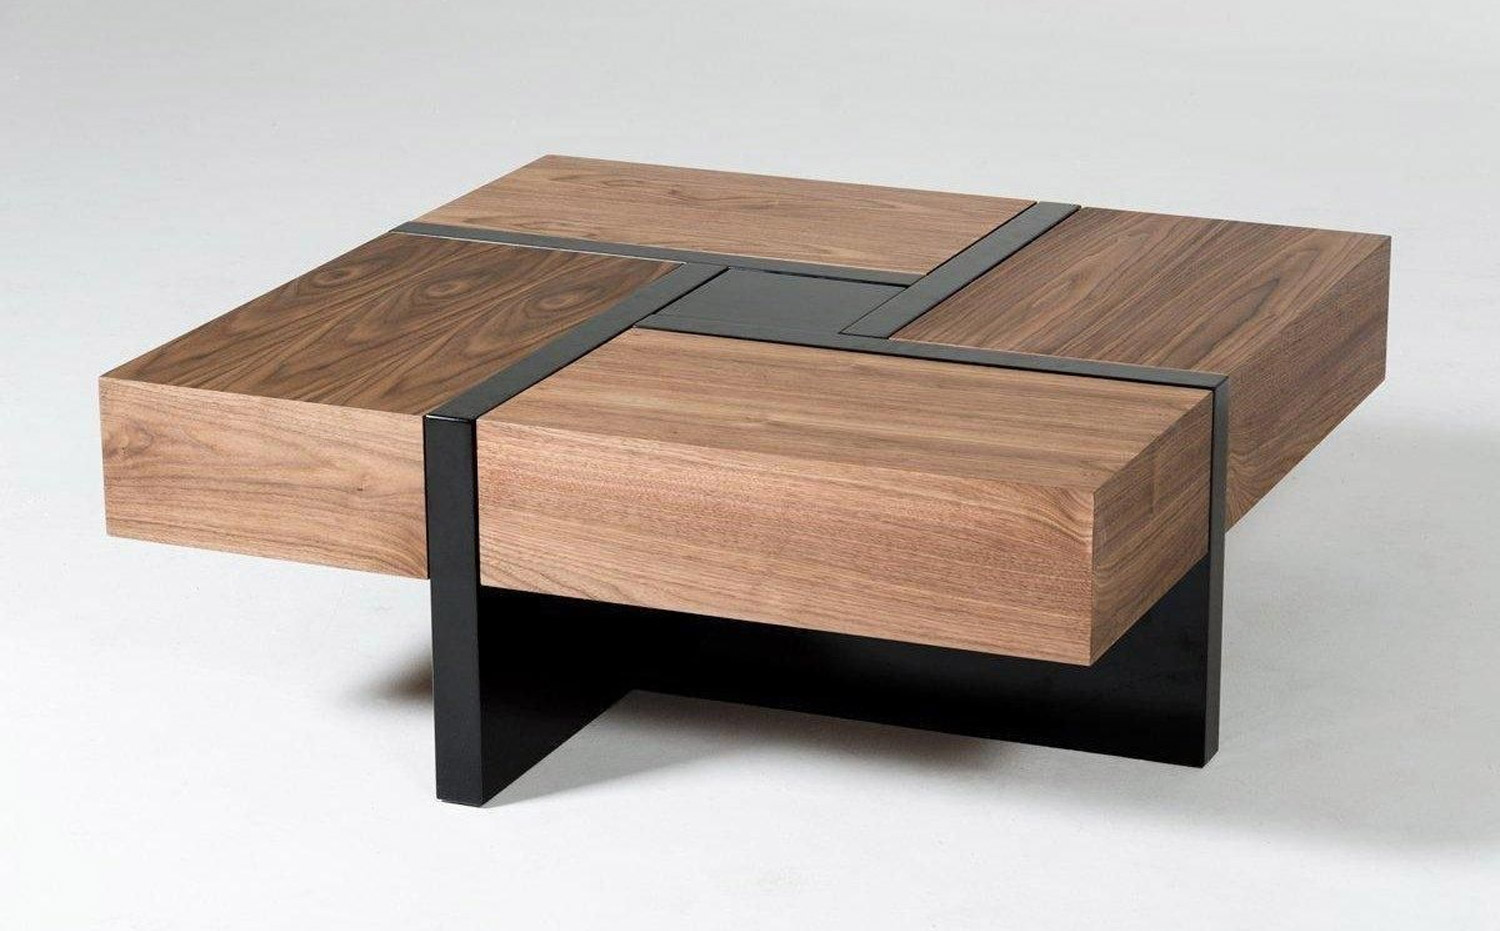 Lipscomb Solid Coffee Table with Storage - Wooden coffee table with 4 secret sliding drawers